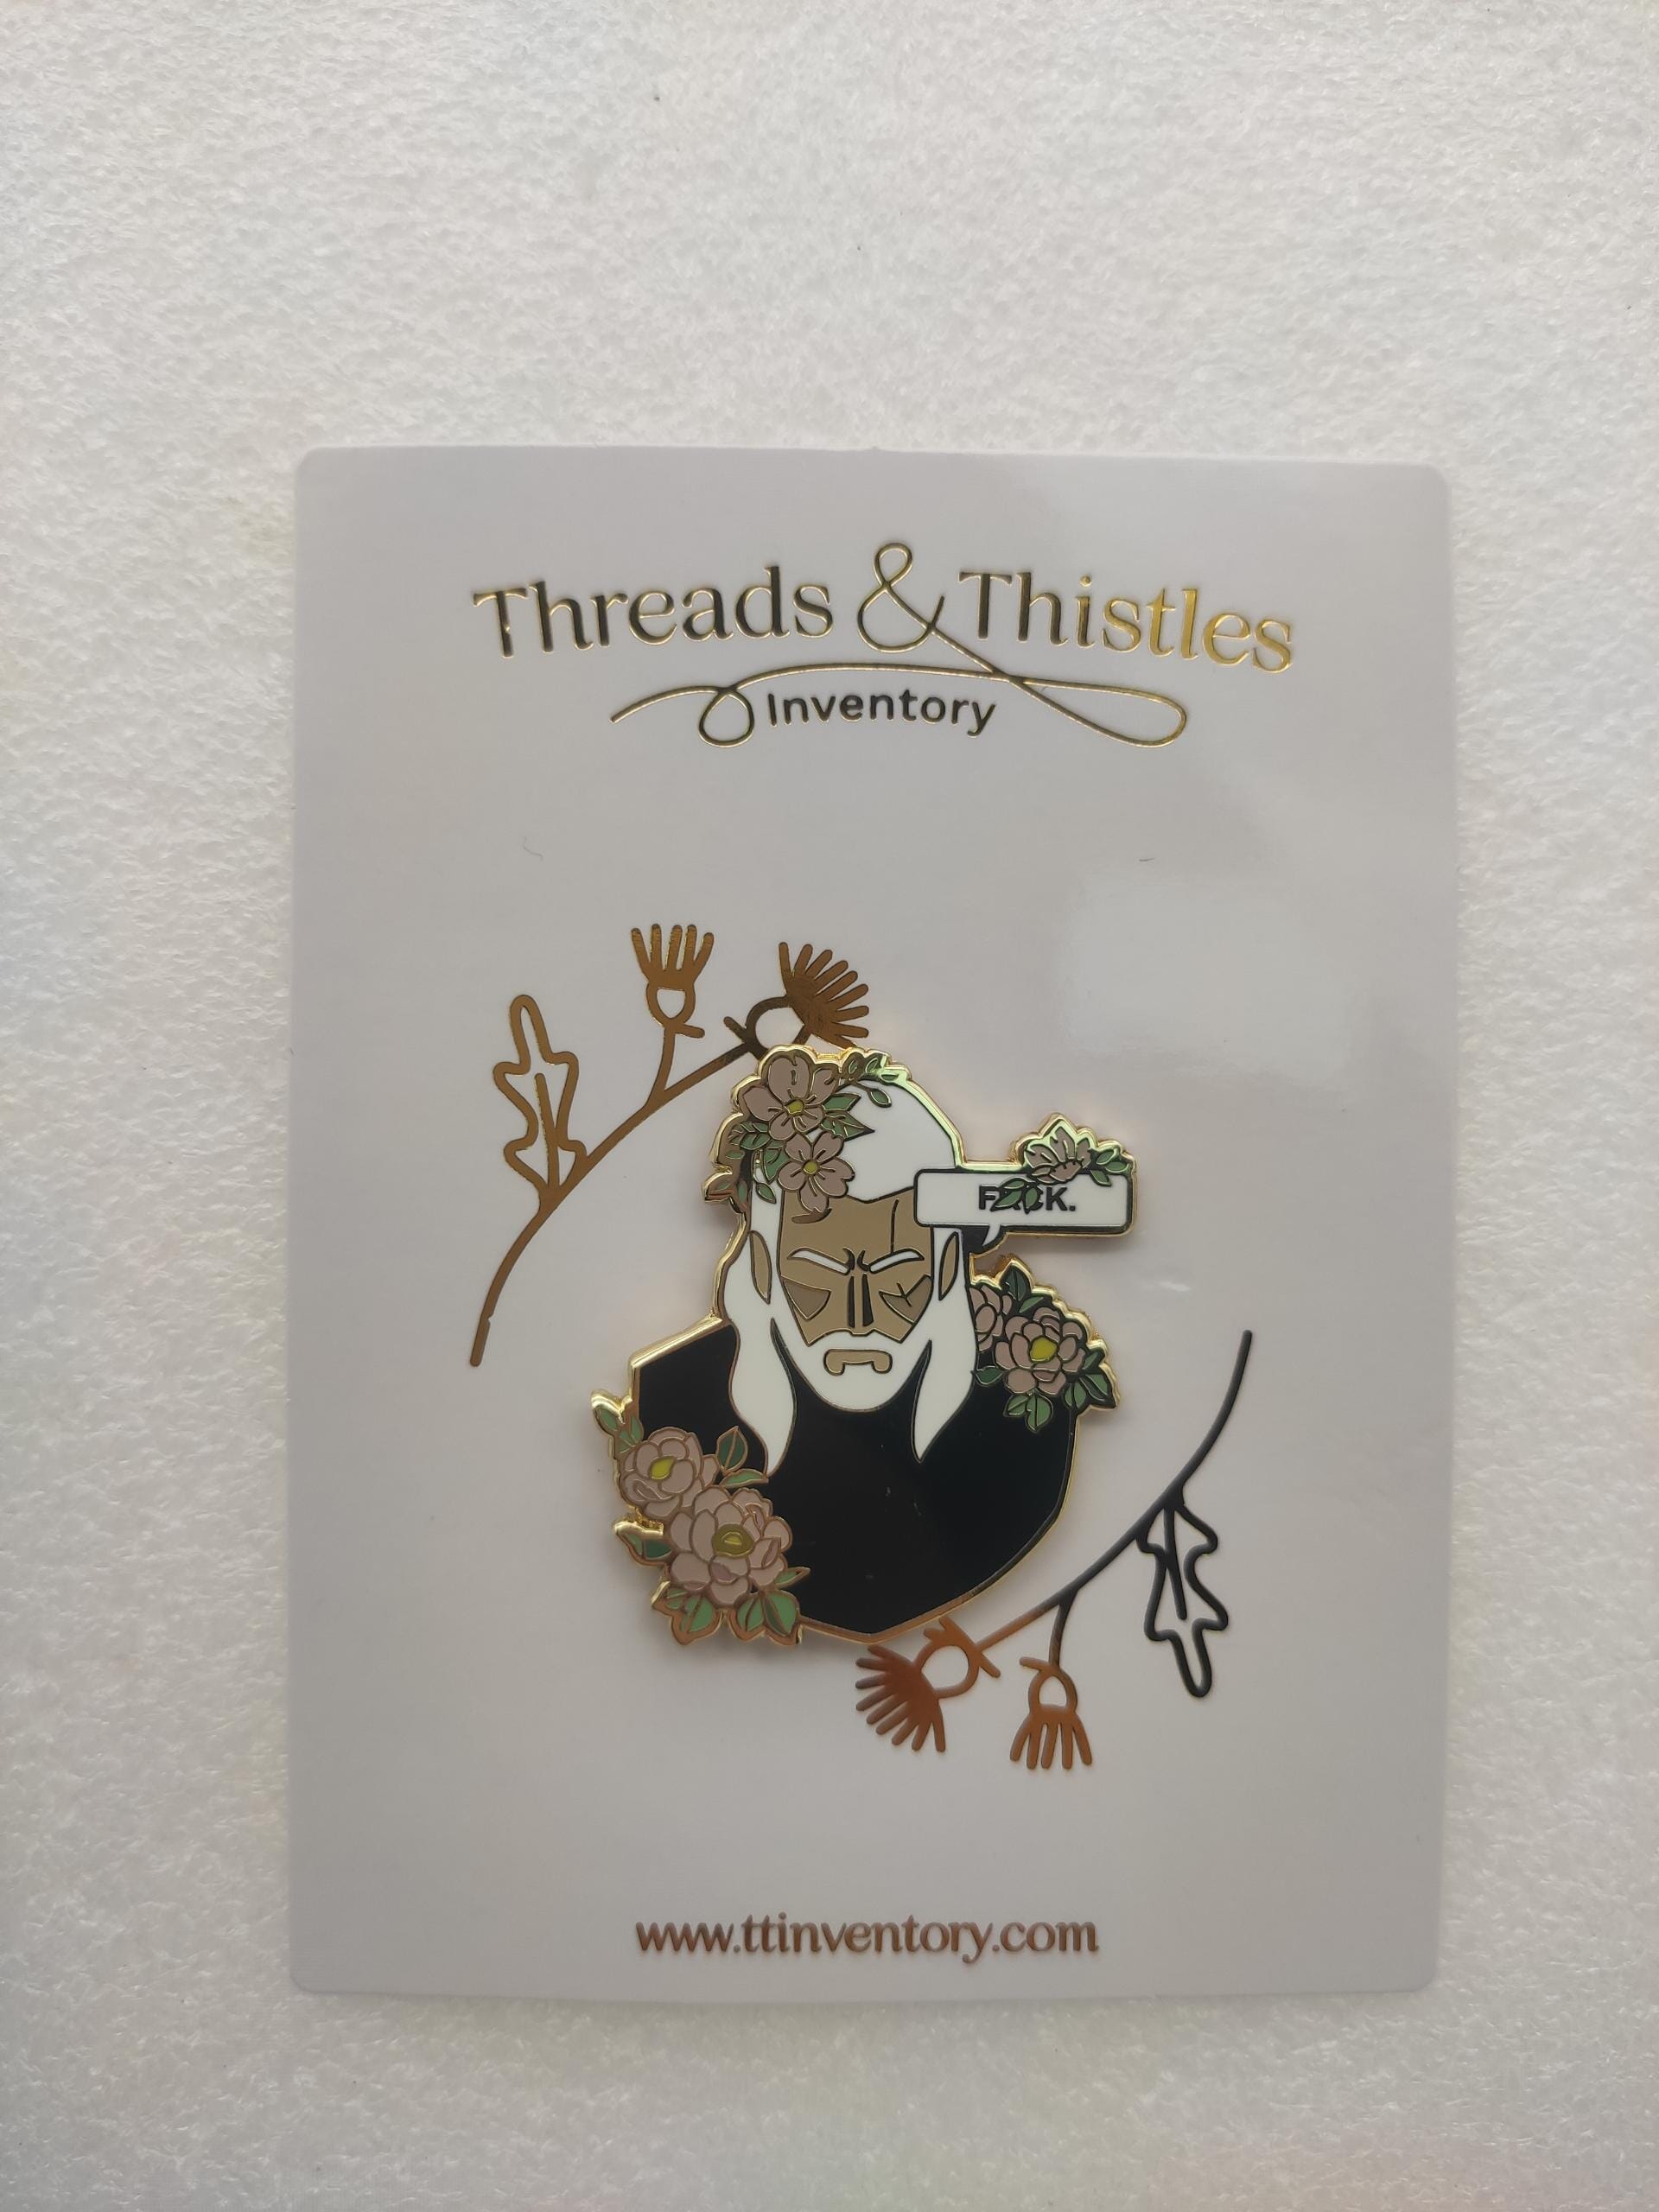 Floral Witcher - Enamel Pin Threads & Thistles Inventory 